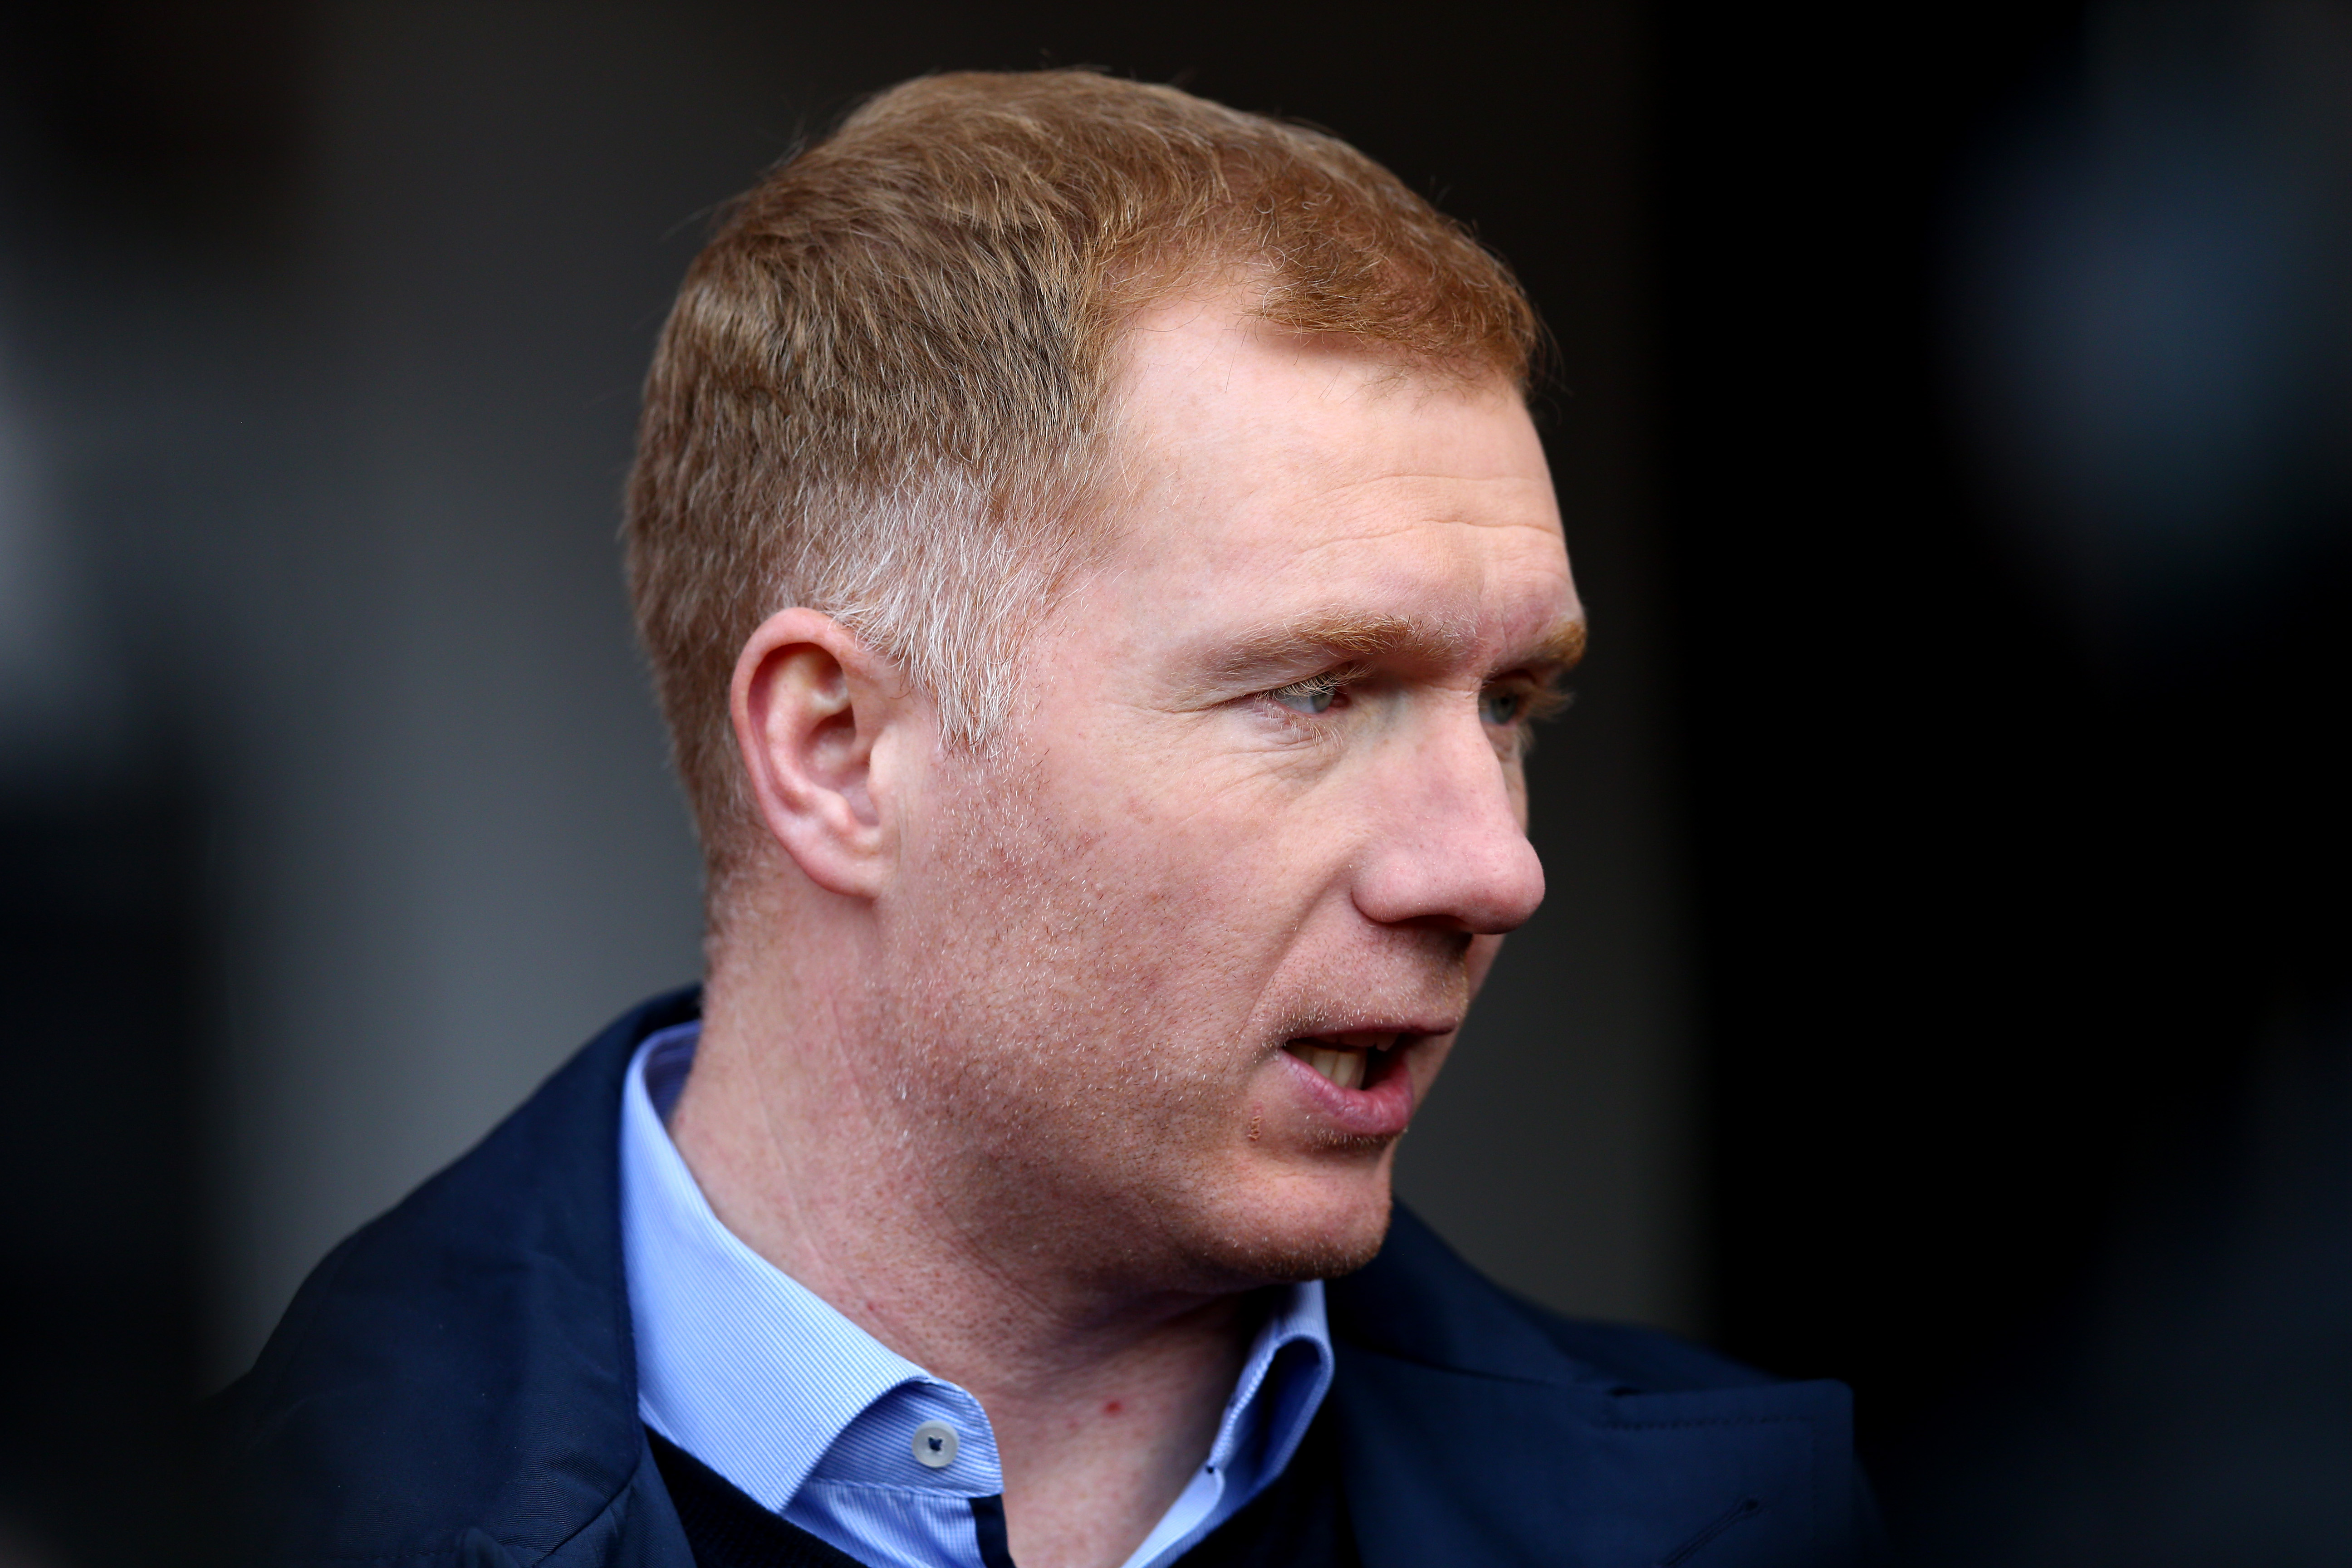 MANCHESTER, ENGLAND - MARCH 13:  Ex Manchester United player Paul Scholes working for BT Sport prior to The Emirates FA Cup Sixth Round match between Manchester United and West Ham United at Old Trafford on March 13, 2016 in Manchester, England.  (Photo by Clive Brunskill/Getty Images)